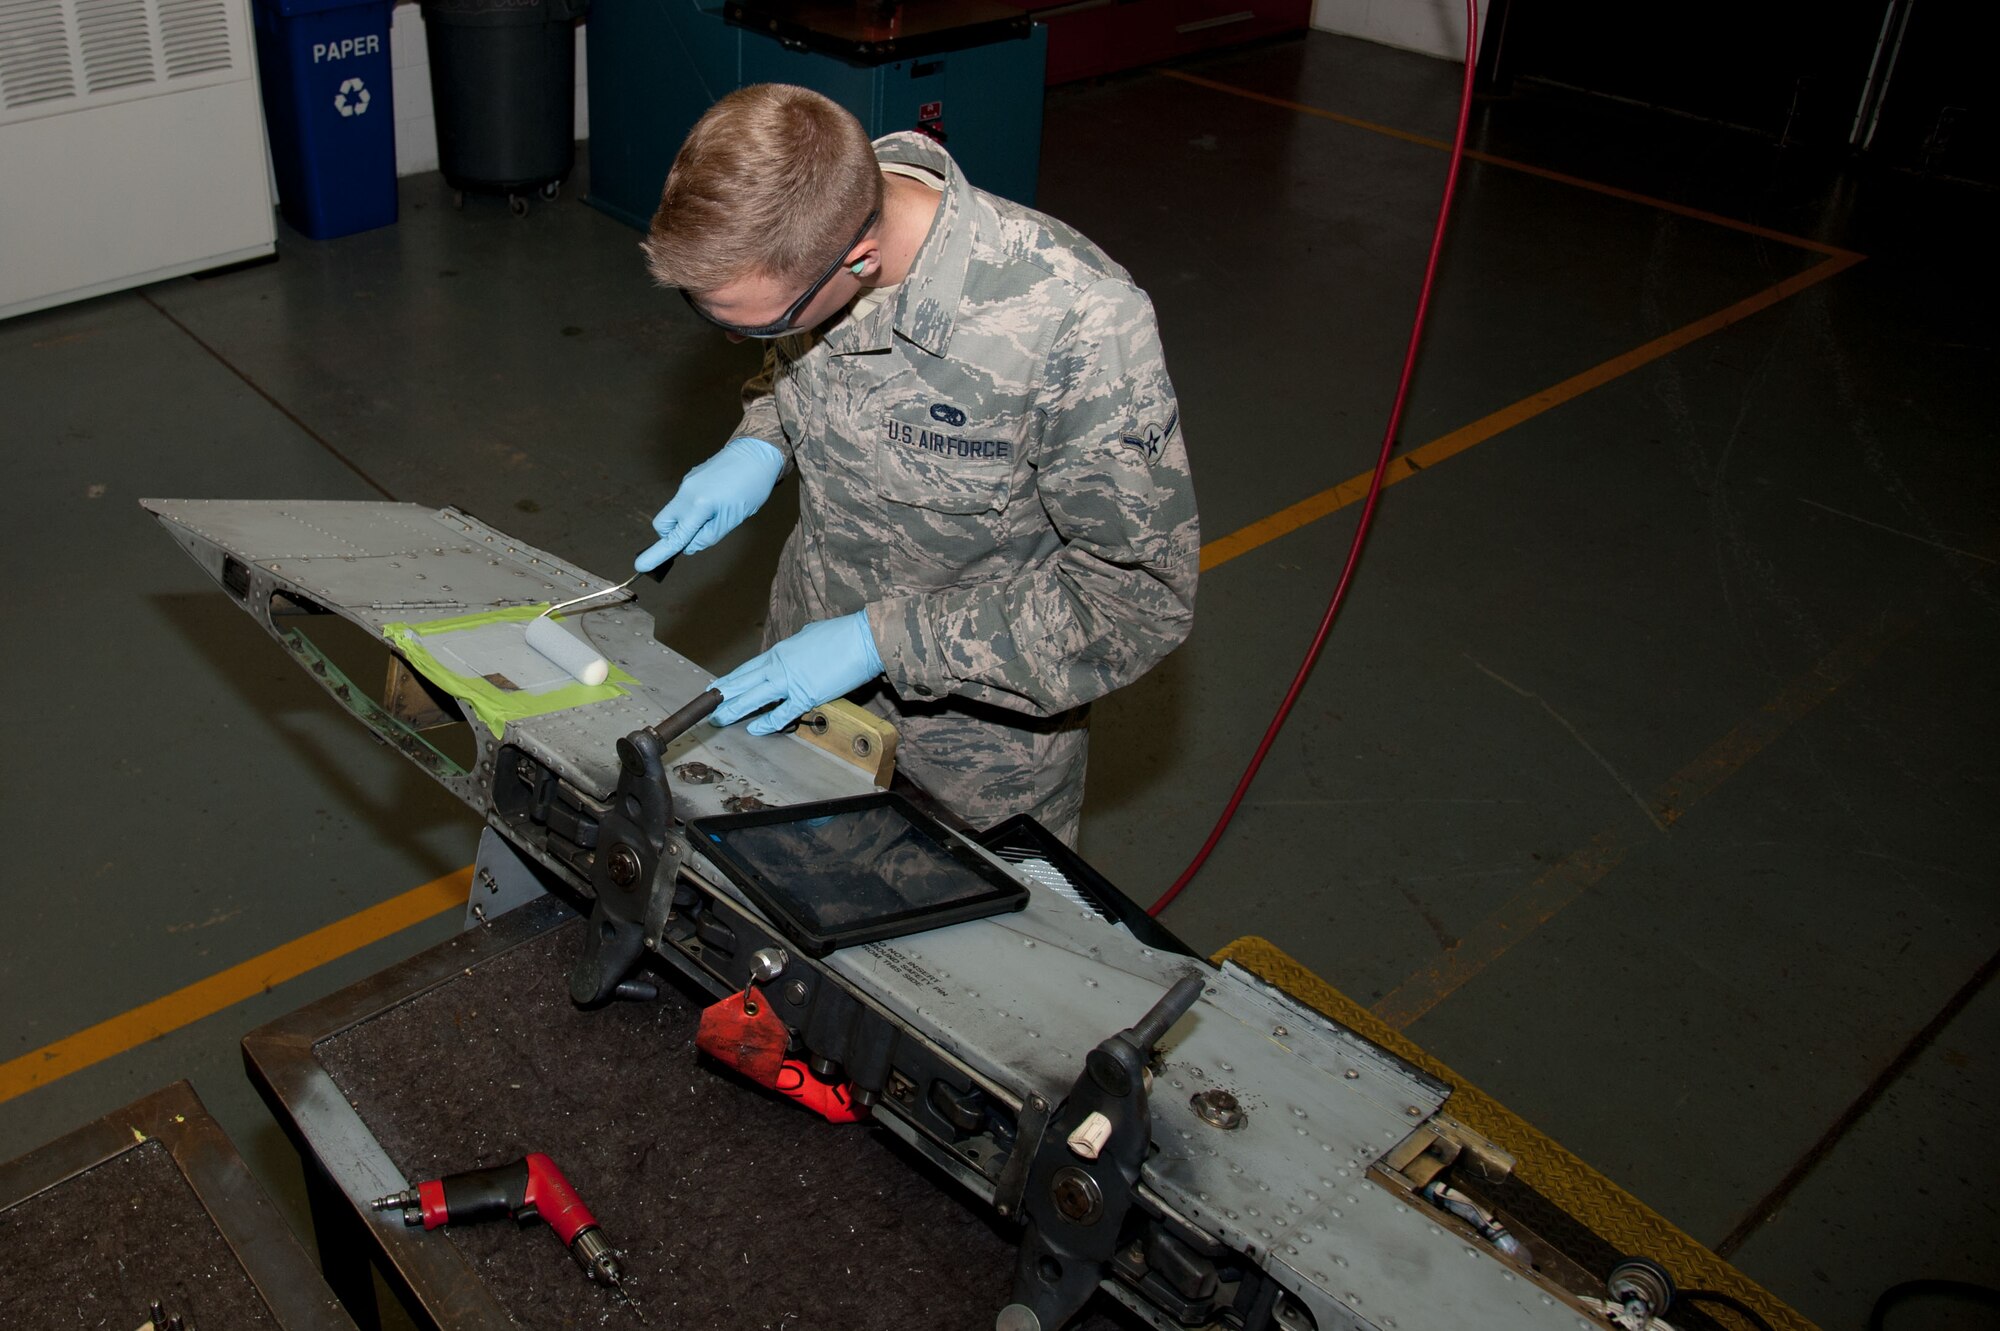 Airman Jared Chappell, 51st Maintenance Squadron aircraft structural maintenance, paints an A-10 Thunderbolt II pylon after repairing a crack at Osan Air Base, Republic of Korea, June 28, 2016. Chappell was repairing a crack in the pylon to return it to full mission capability. Chappell is assigned to structural maintenance shop and is part of the fabrication flight which also has non-destructive inspection and metals technology. Fabrication flight Airmen identify, repair and build parts to working order so that Osan airframes are ready to fight tonight.  (U.S. Air Force photo by Staff Sgt. Jonathan Steffen/Released)